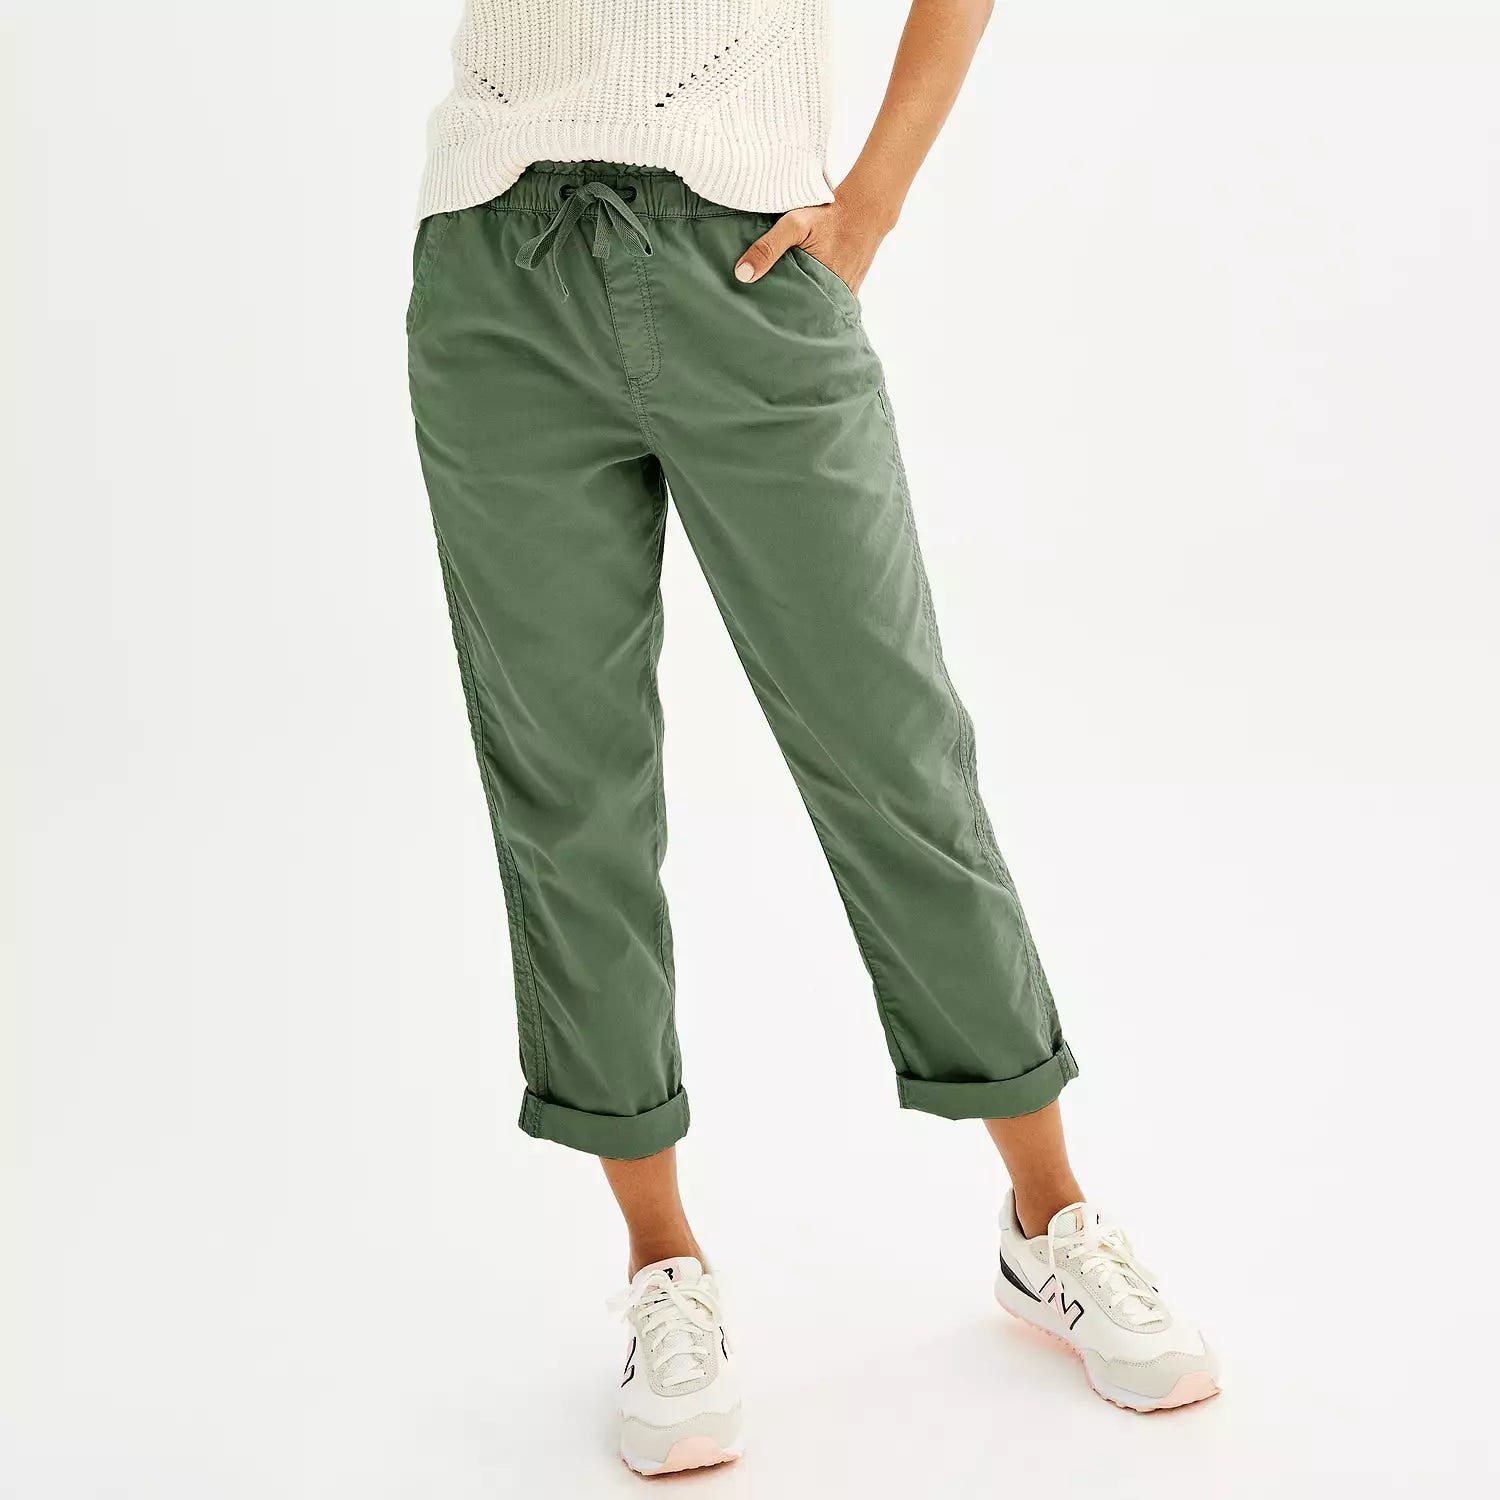 Olive green, cropped jogger pants with drawstring waist, paired with white sneakers.